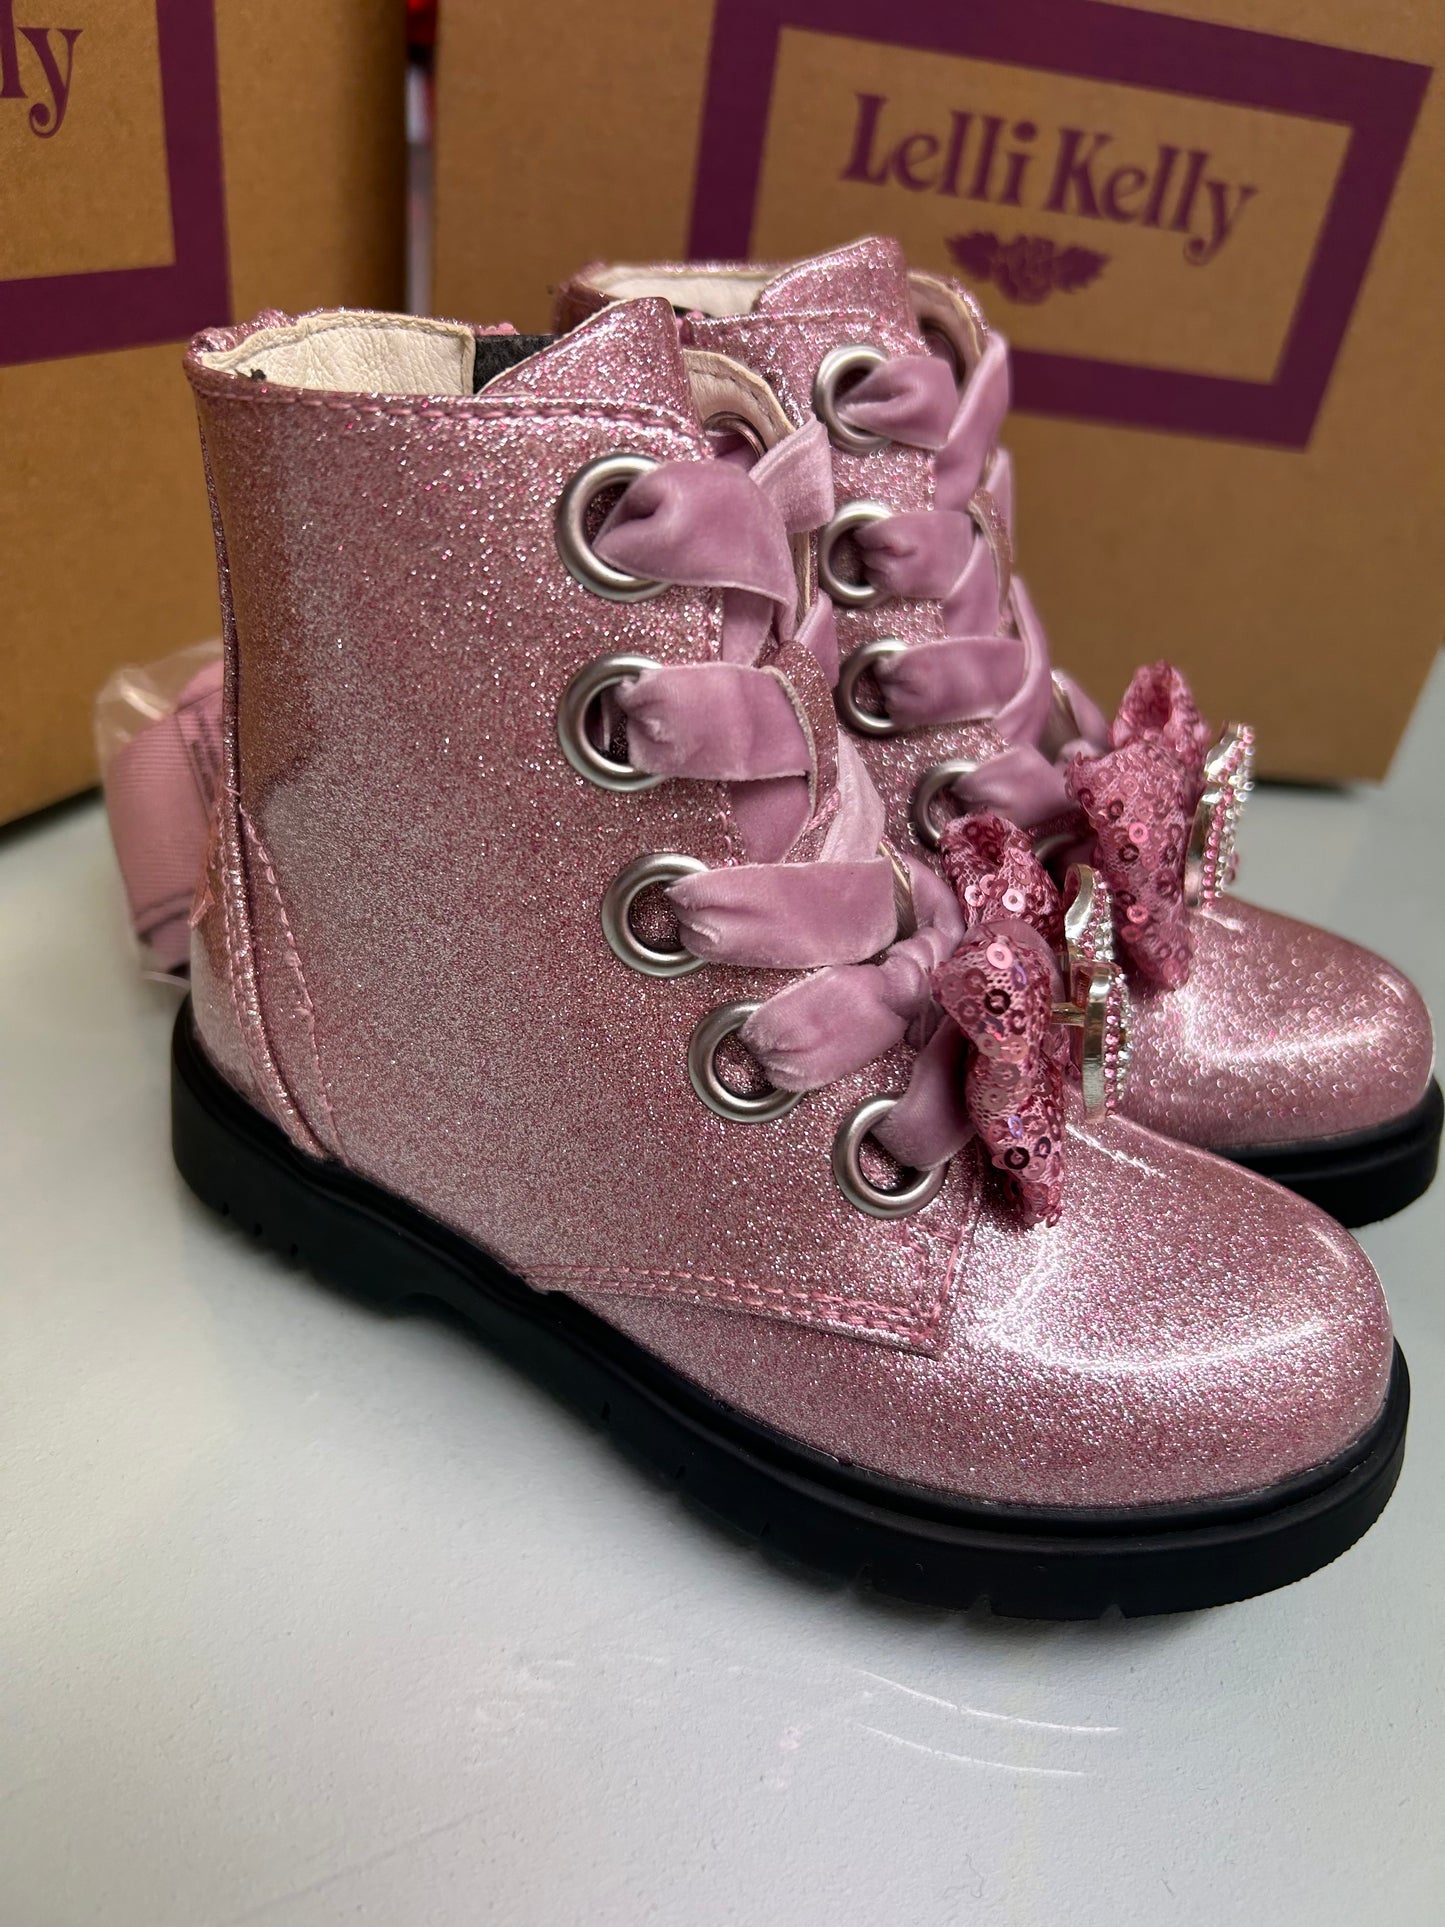 Lelli Kelly Fioldi Rocco Pink Glitter Bow Boot